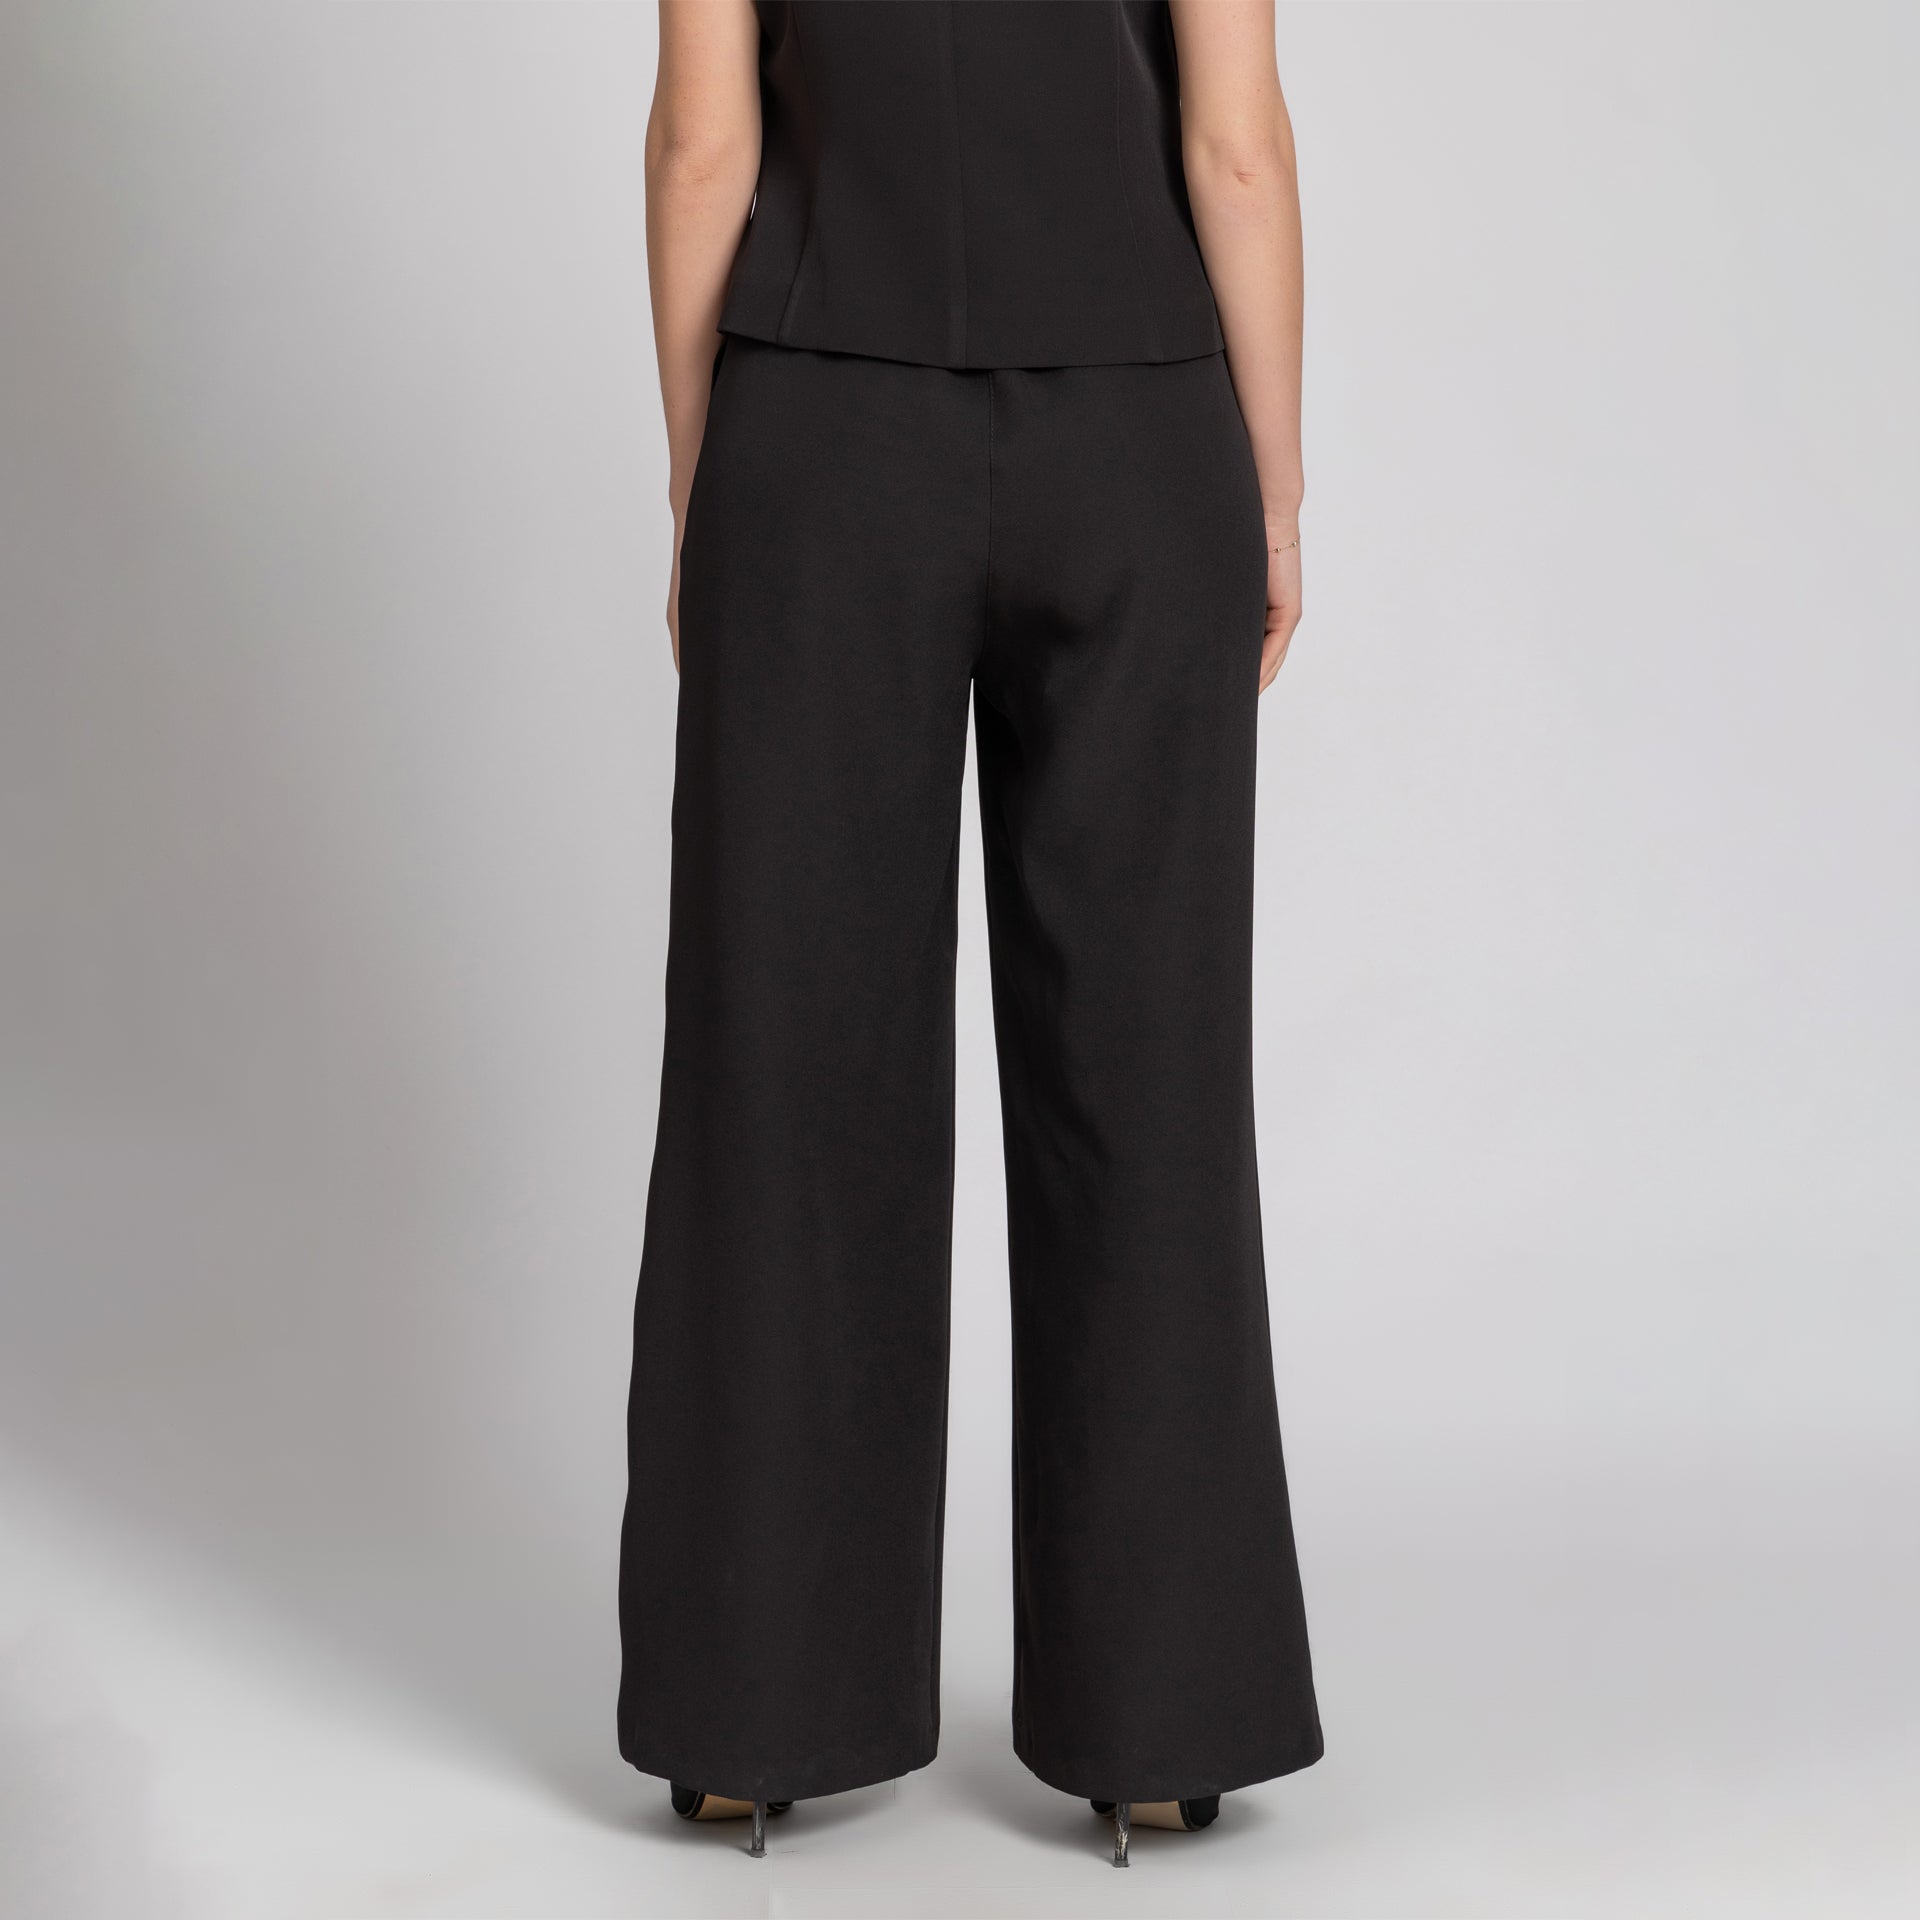 Black Straight-Cut Formal Crepe Trousers From Elanove